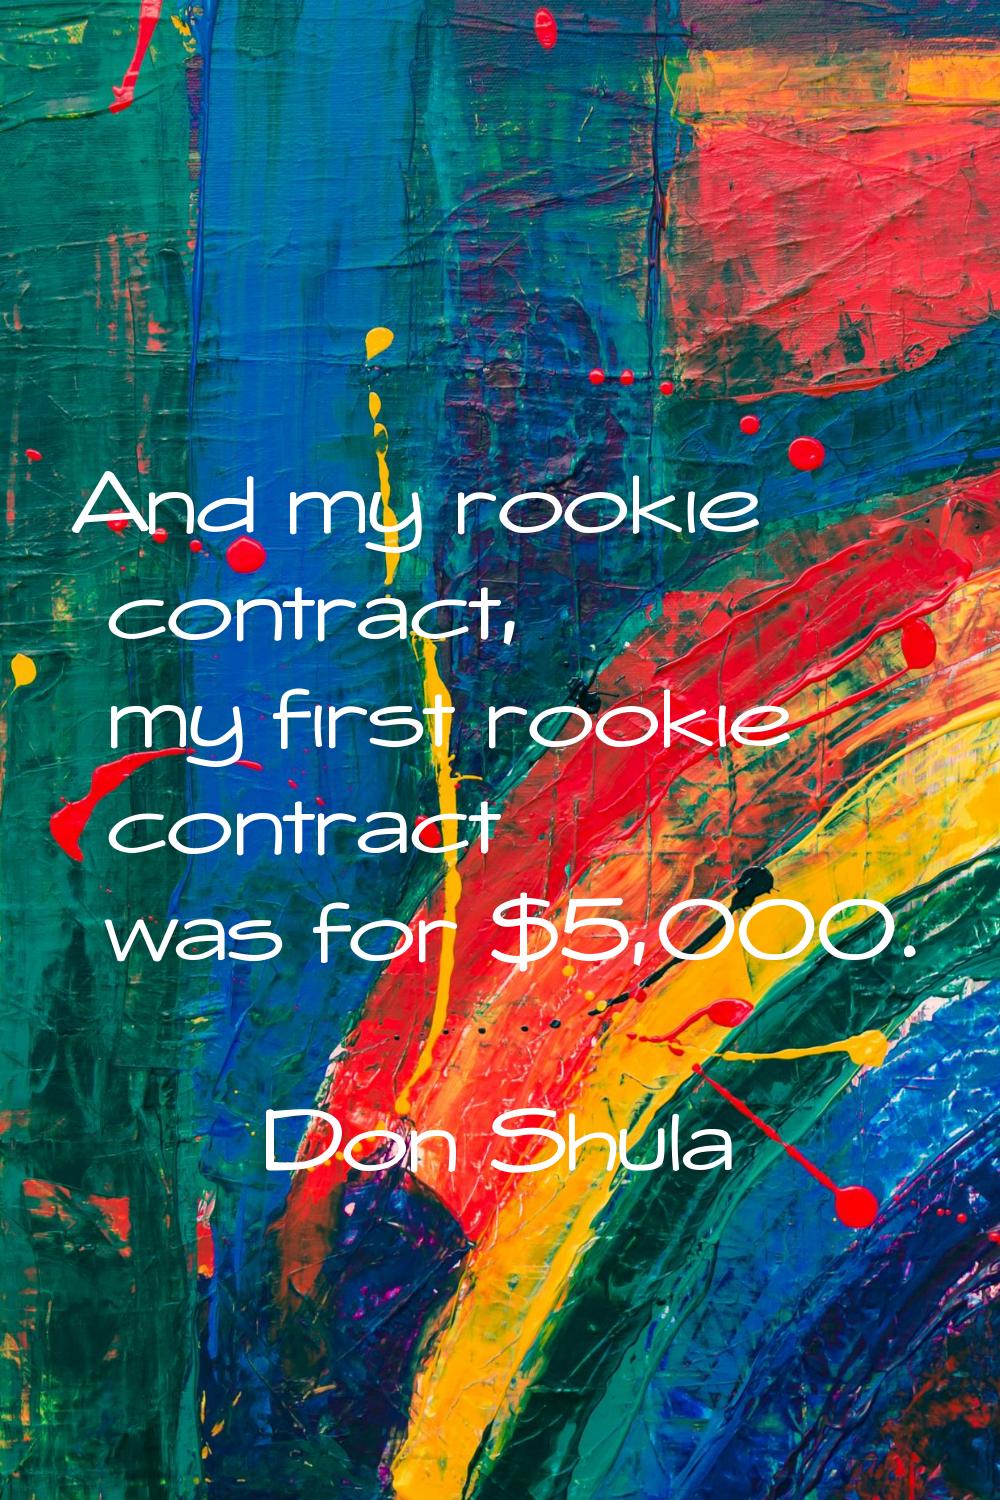 And my rookie contract, my first rookie contract was for $5,000.